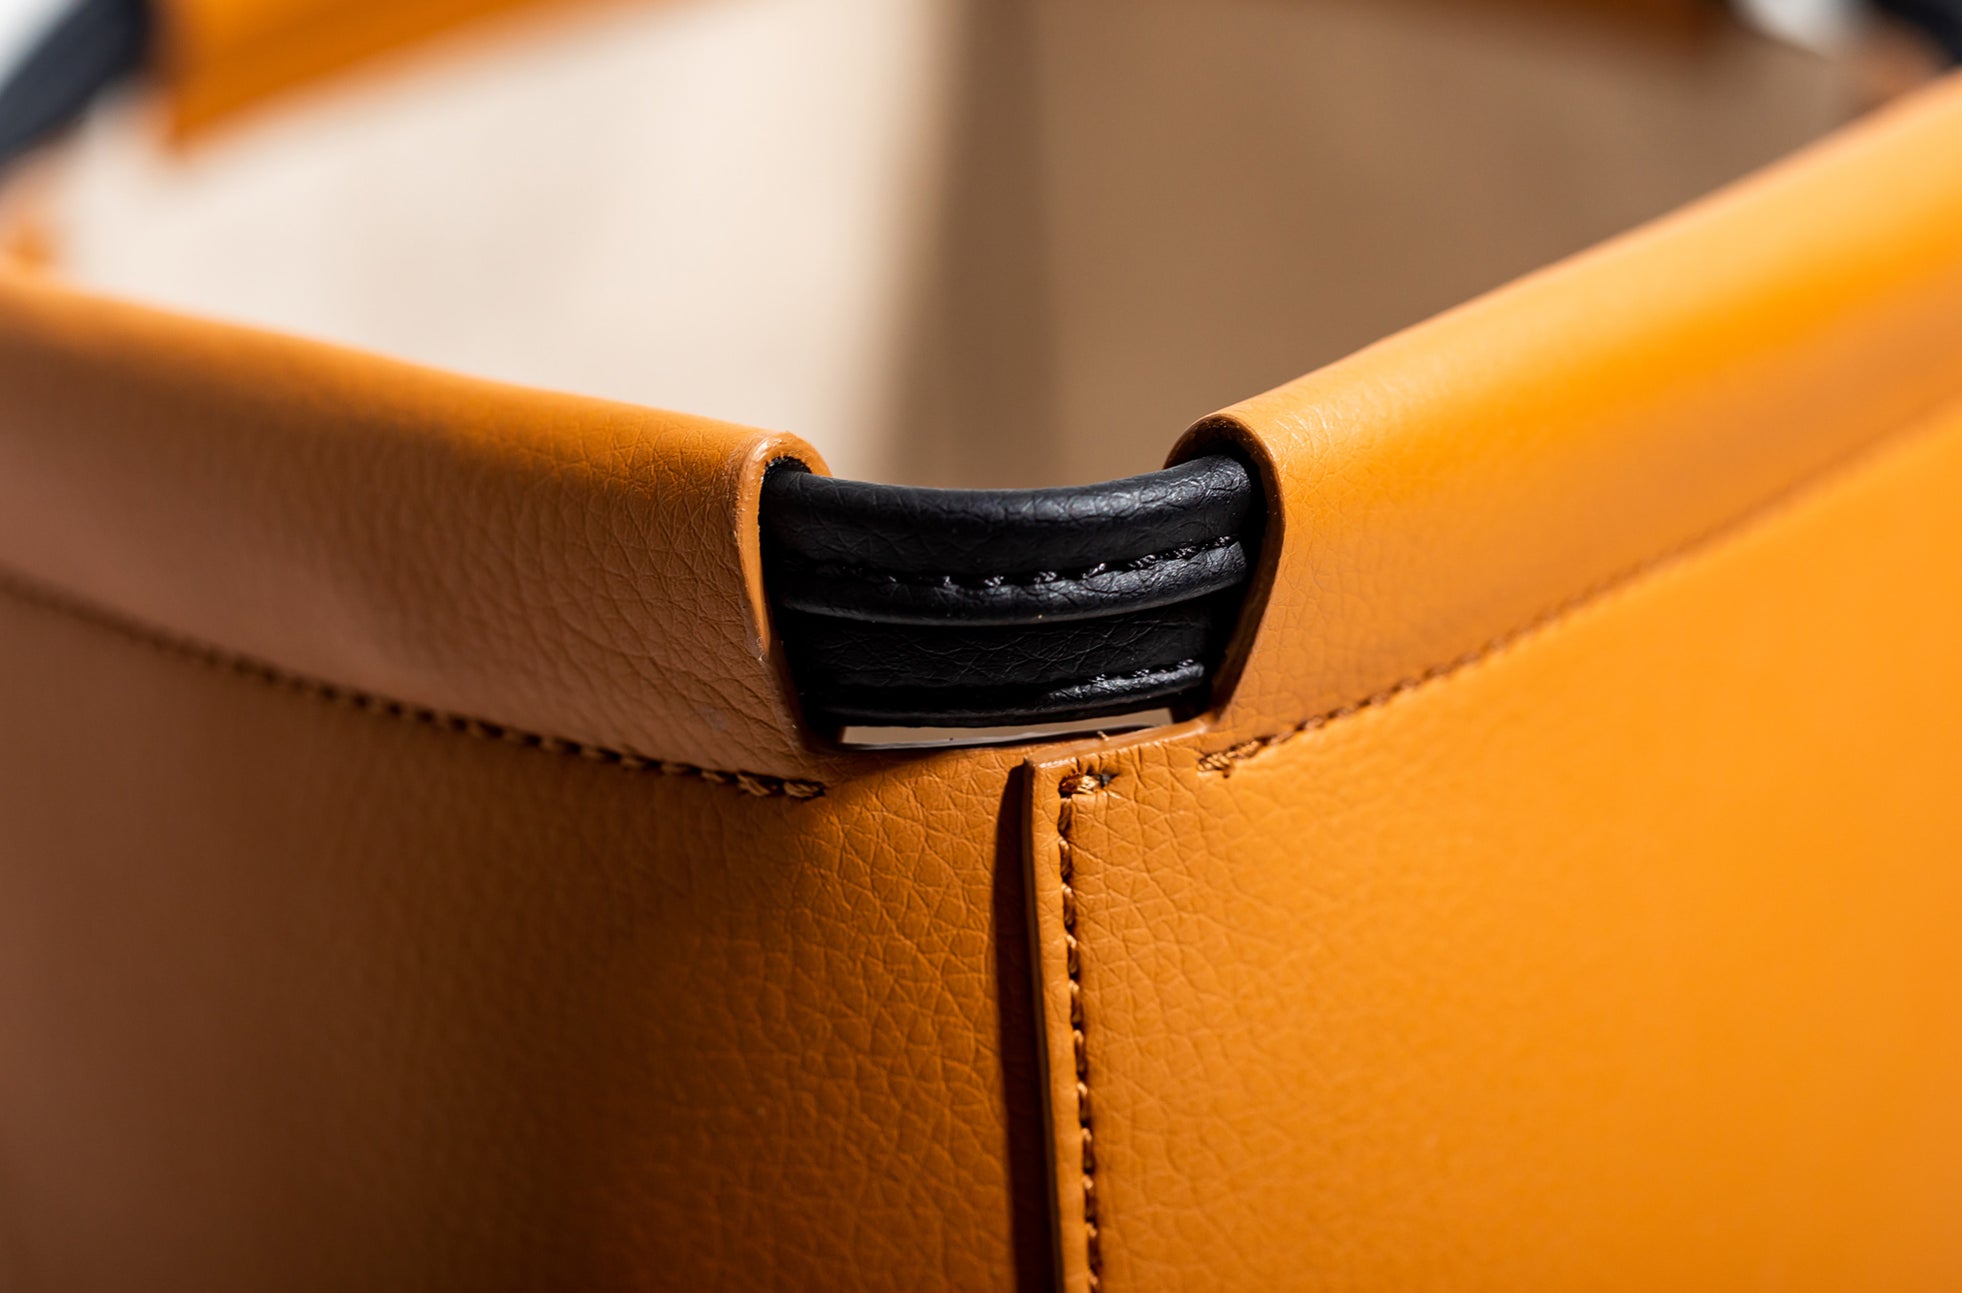 The Market Tote in Technik-Leather in Caramel and Black image 8